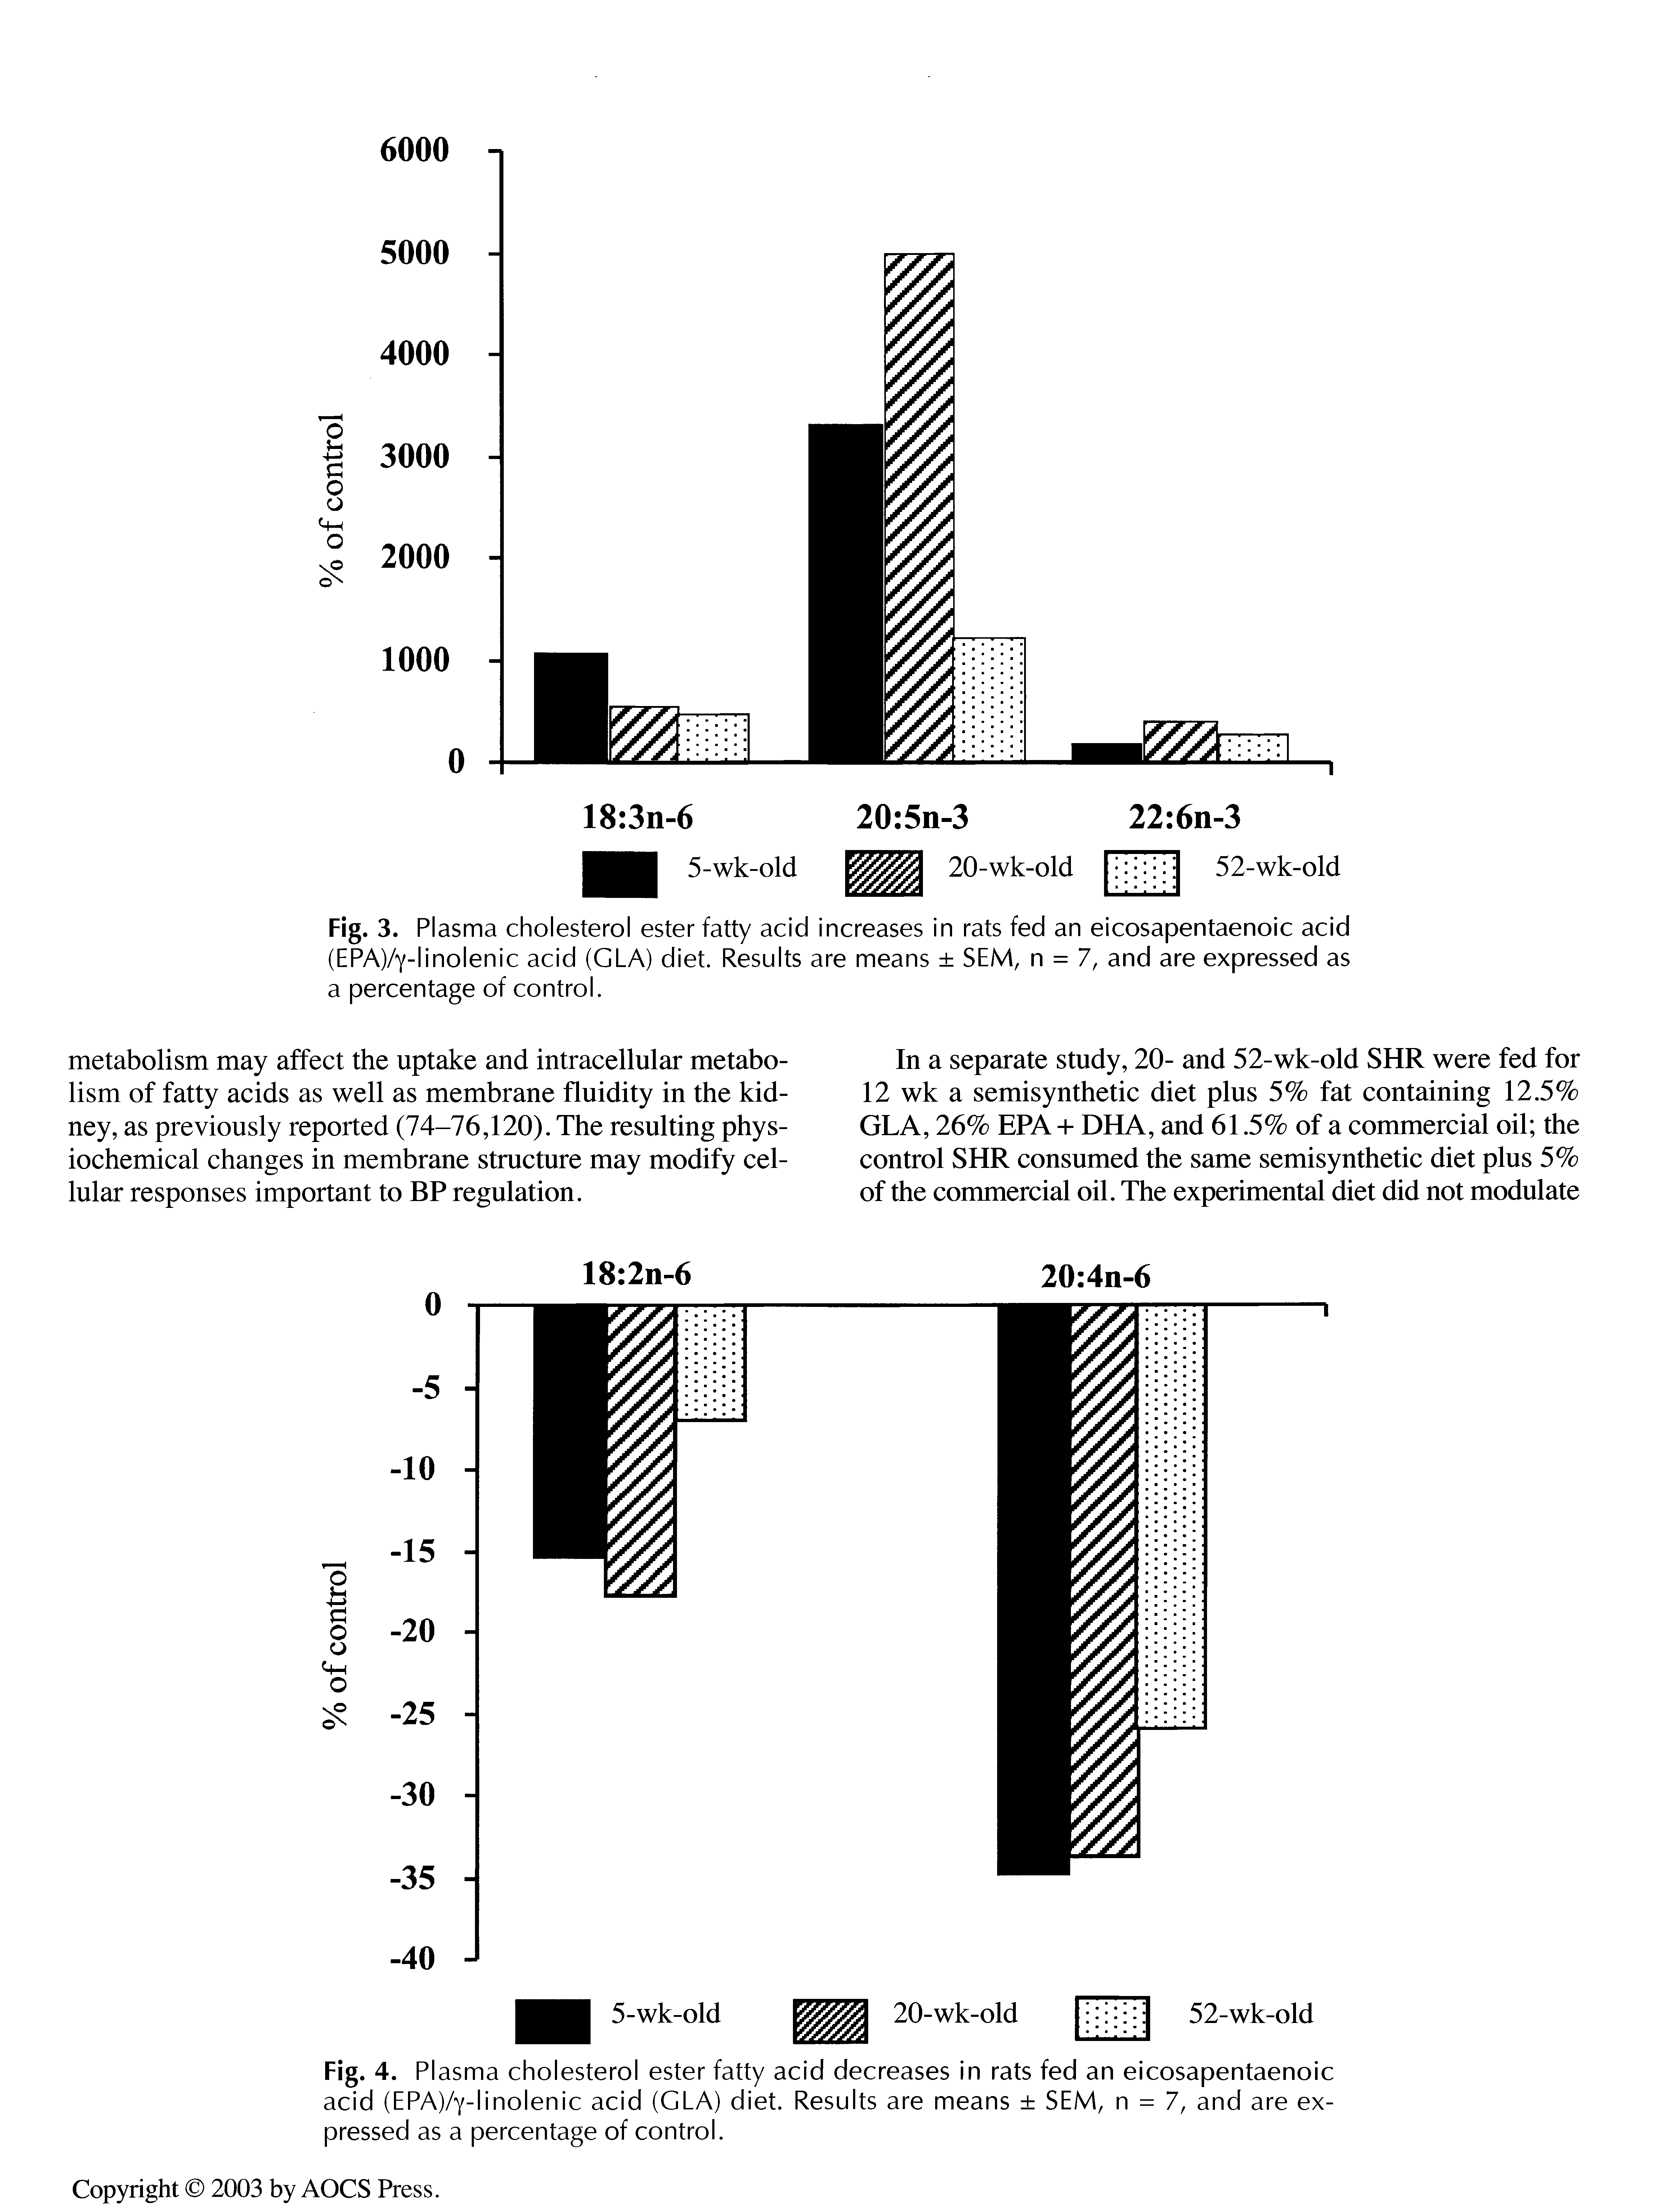 Fig. 3. Plasma cholesterol ester fatty acid increases in rats fed an eicosapentaenoic acid (EPAVy-linolenic acid (GLA) diet. Results are means SEM, n = 7, and are expressed as a percentage of control.